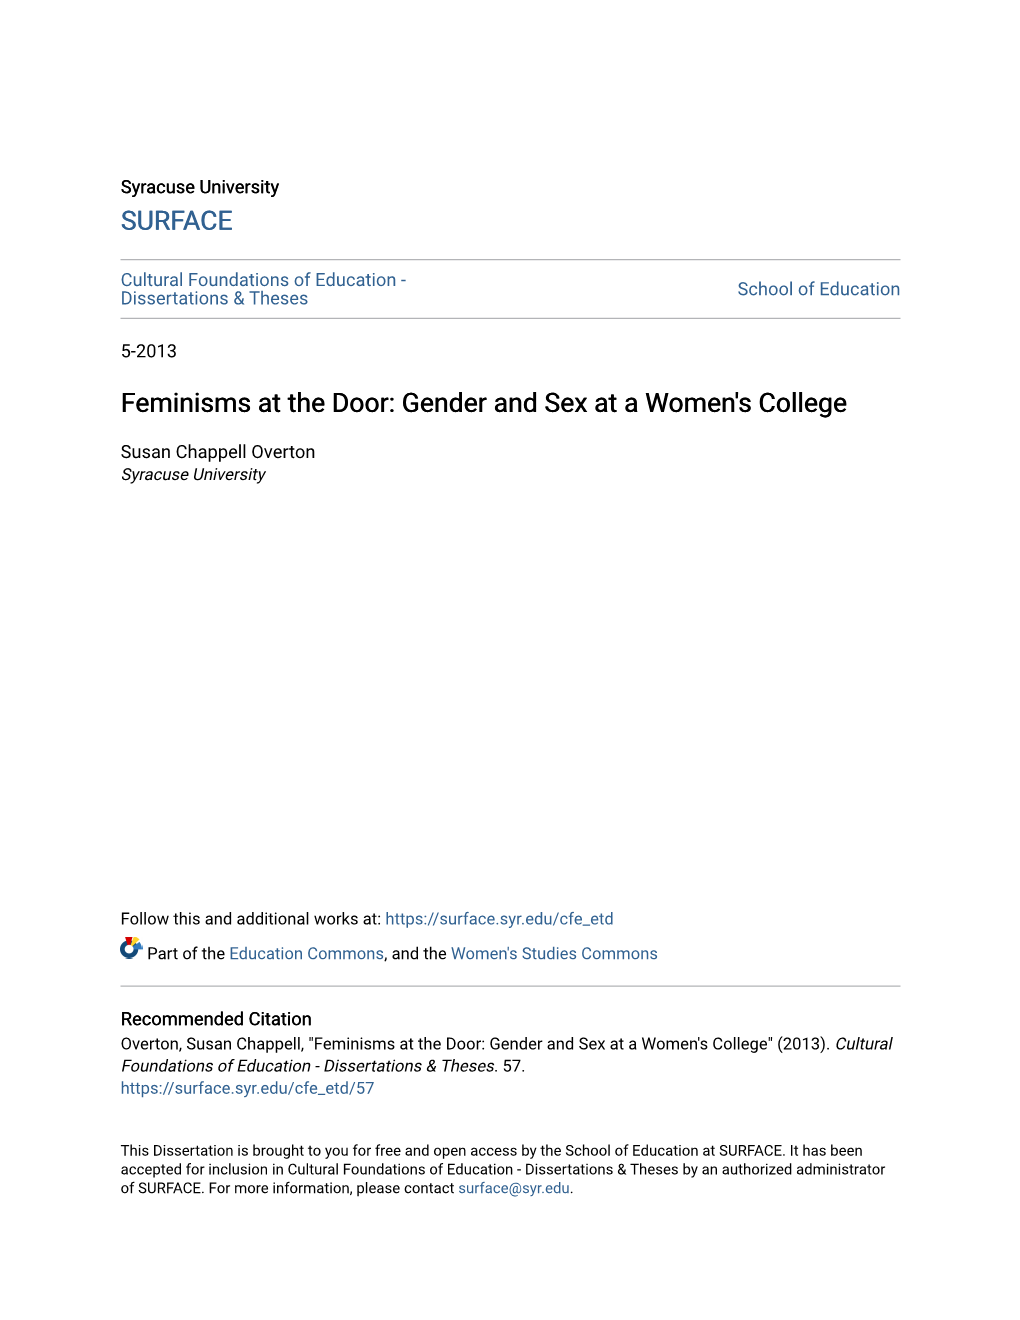 Feminisms at the Door: Gender and Sex at a Women's College